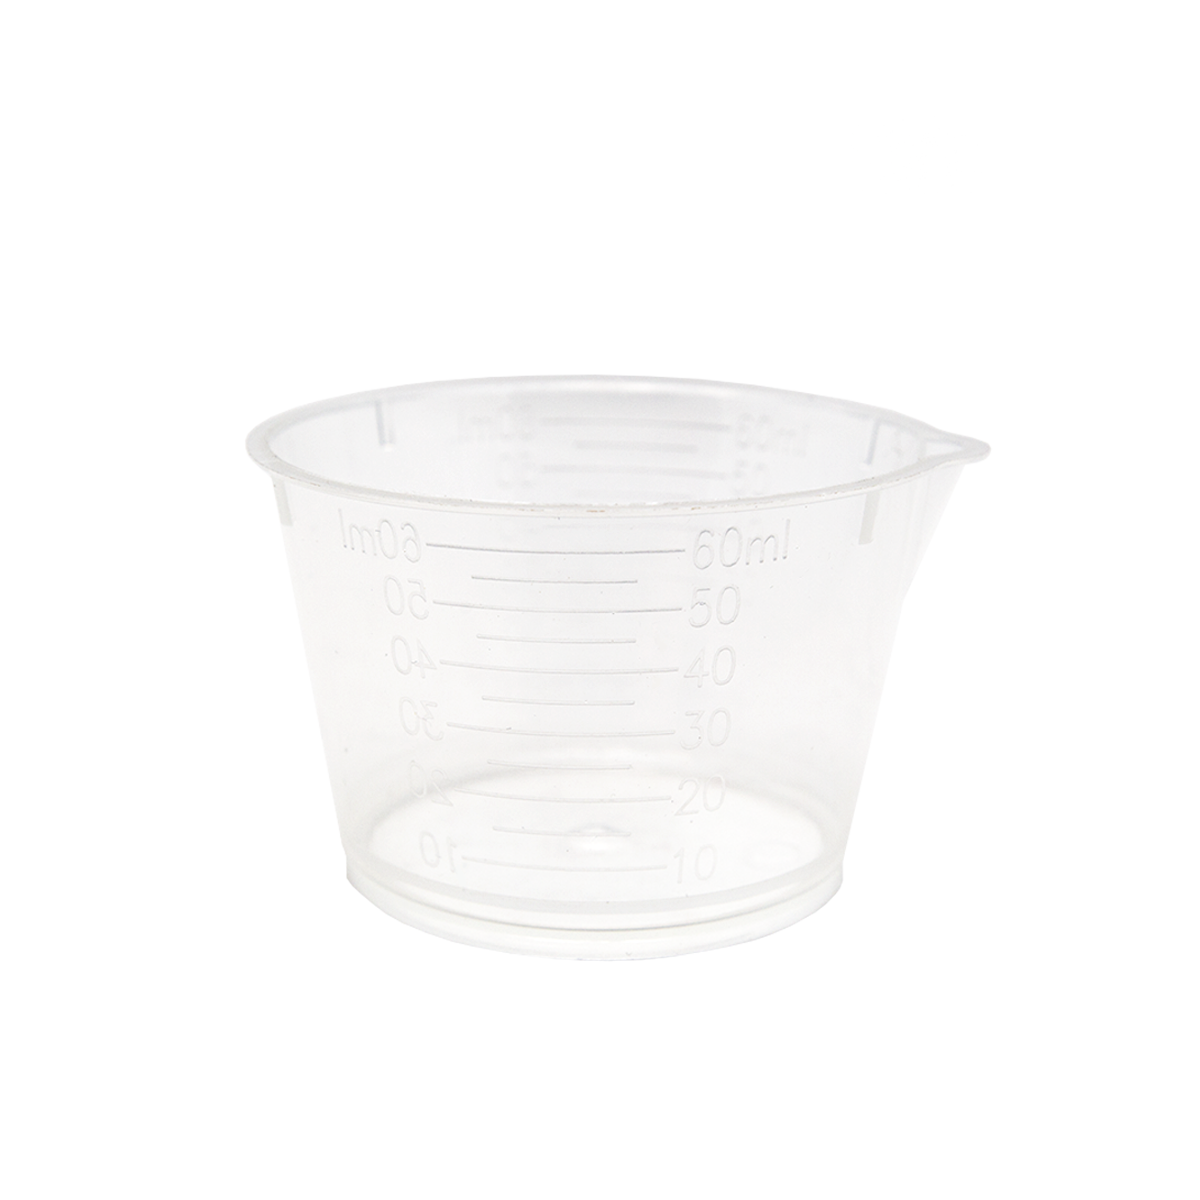  Disposable Measuring Cups for Resin - Pack of 20 8oz Clear  Plastic Measuring Cup for Epoxy Resin, Stain, Paint Mixing - Half Pint  Reusable Multipurpose Mixing Cups for Cooking and Baking